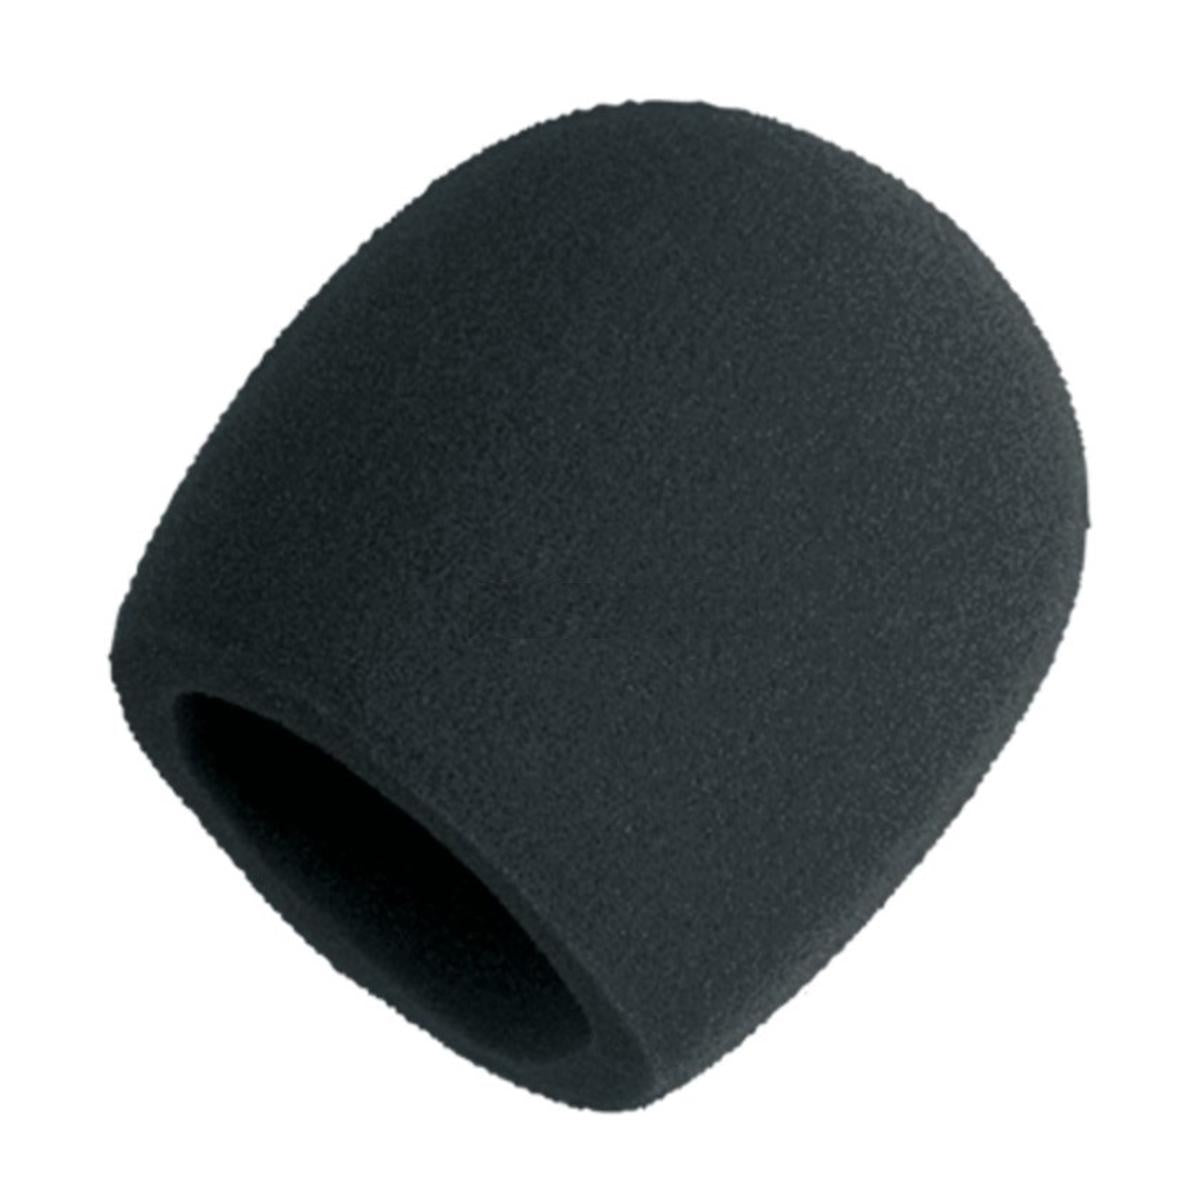 Shure A58WS Windscreen for SM58 & Other Ball Microphones - Black